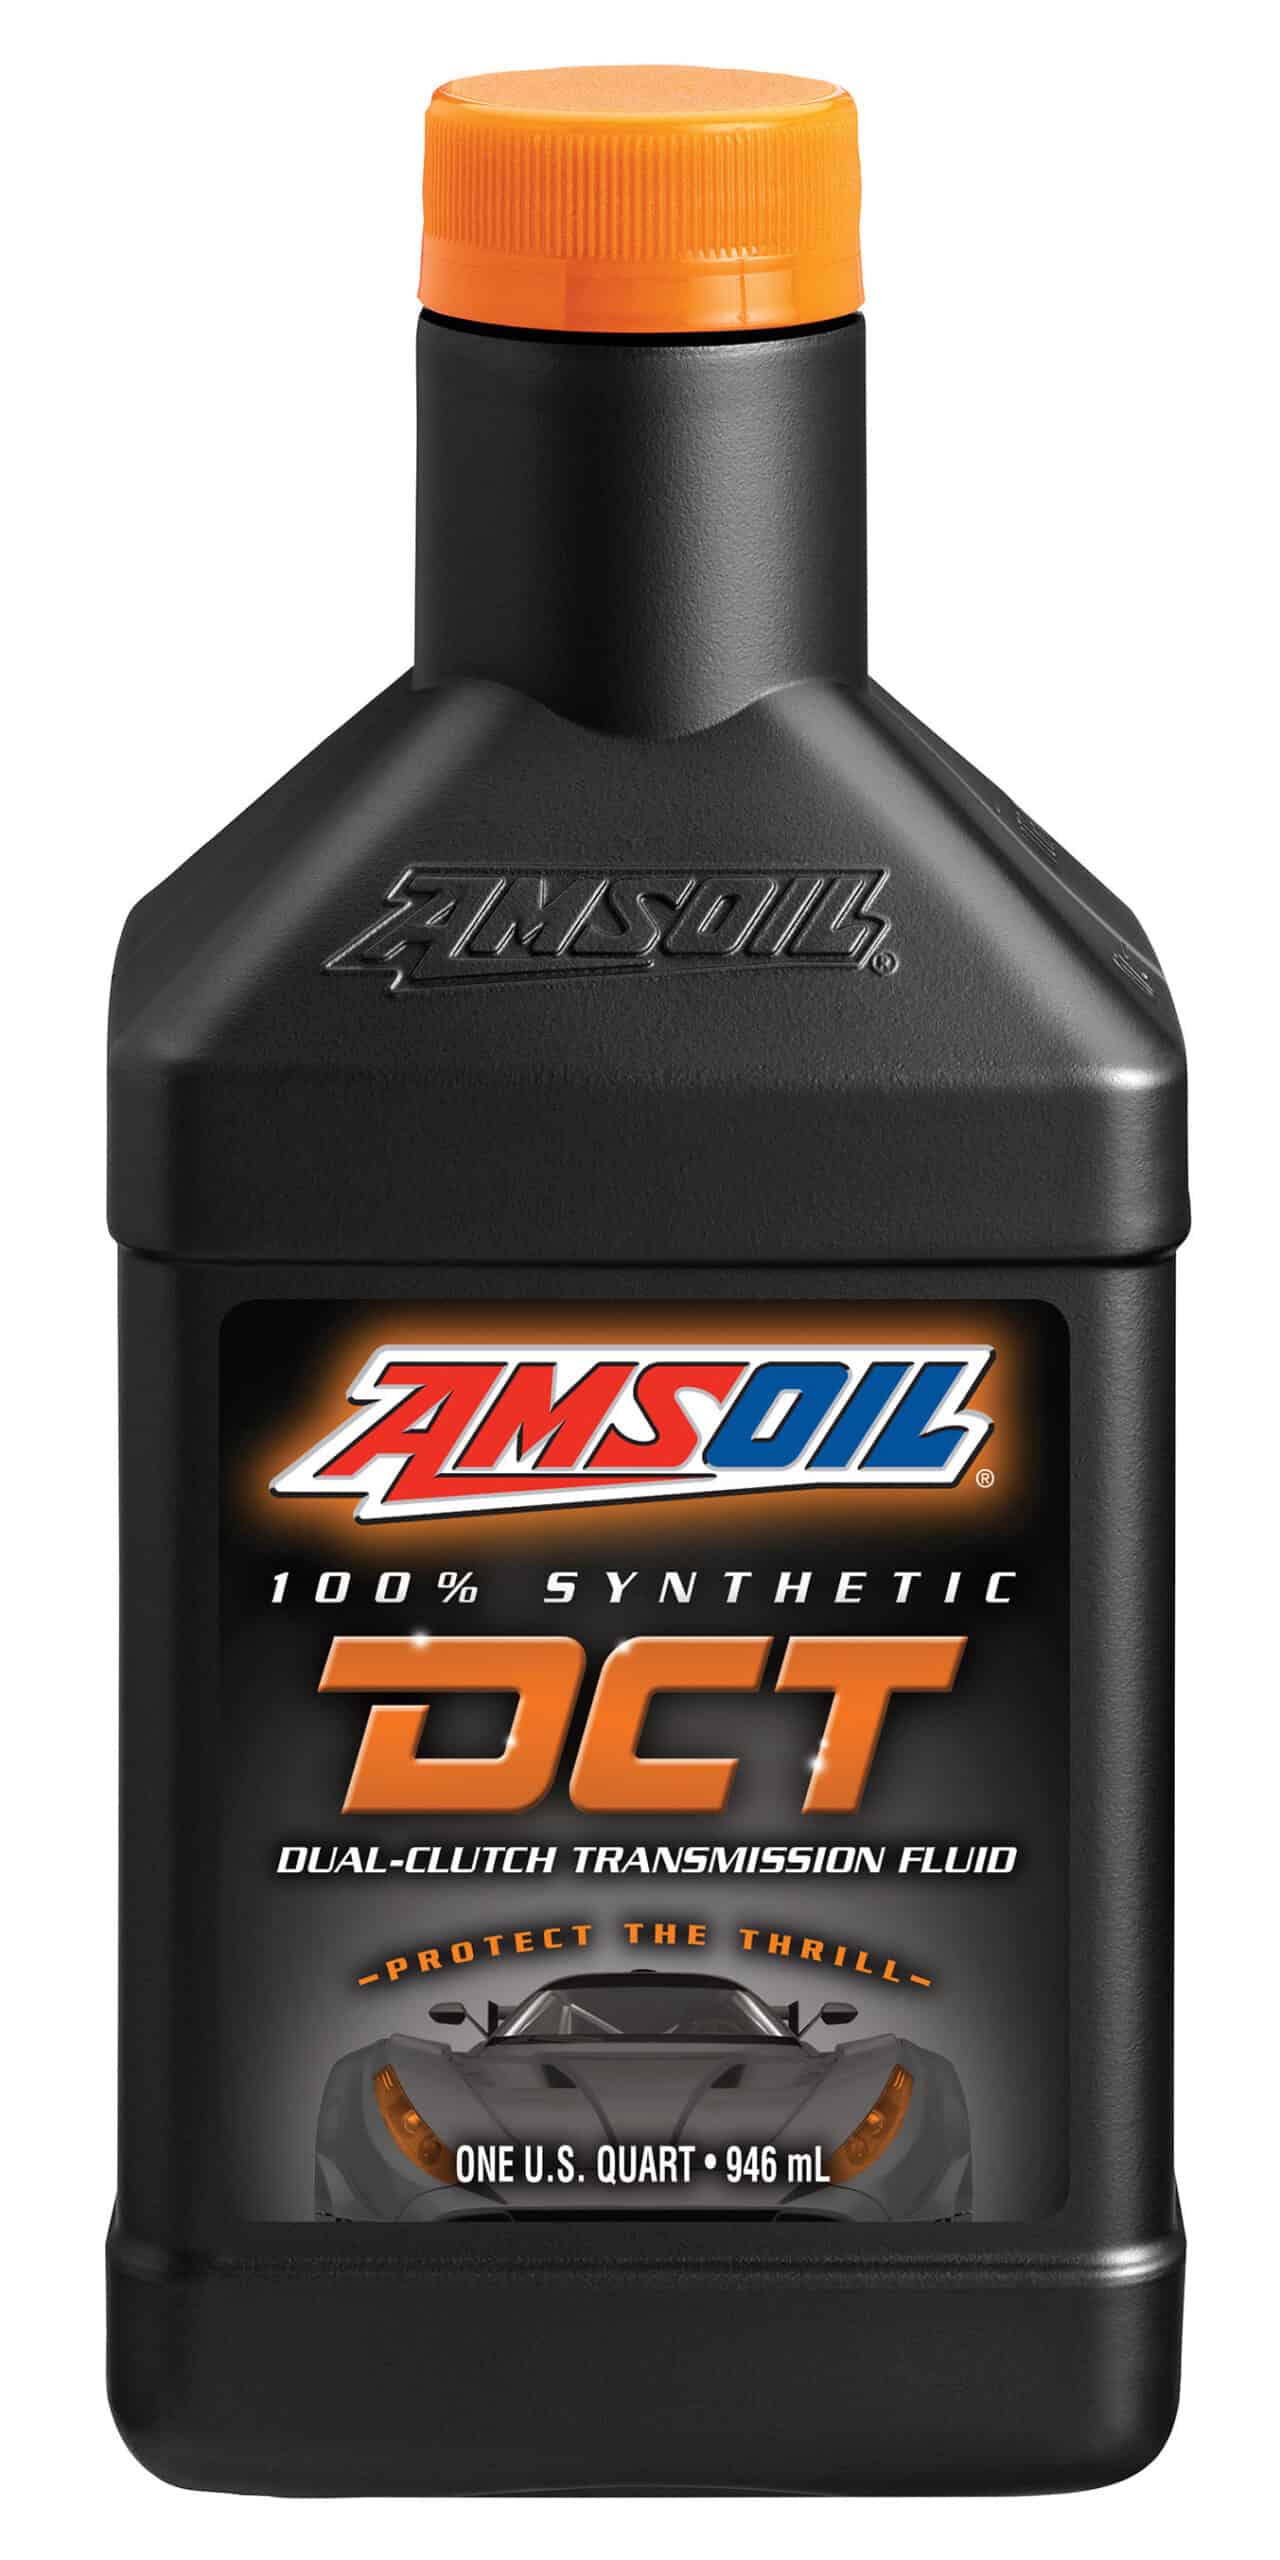 A bottle of AMSOIL Synthetic DCT Fluid, designed to protect high-tech dual-clutch transmissions during the most intense, high-heat operating conditions.